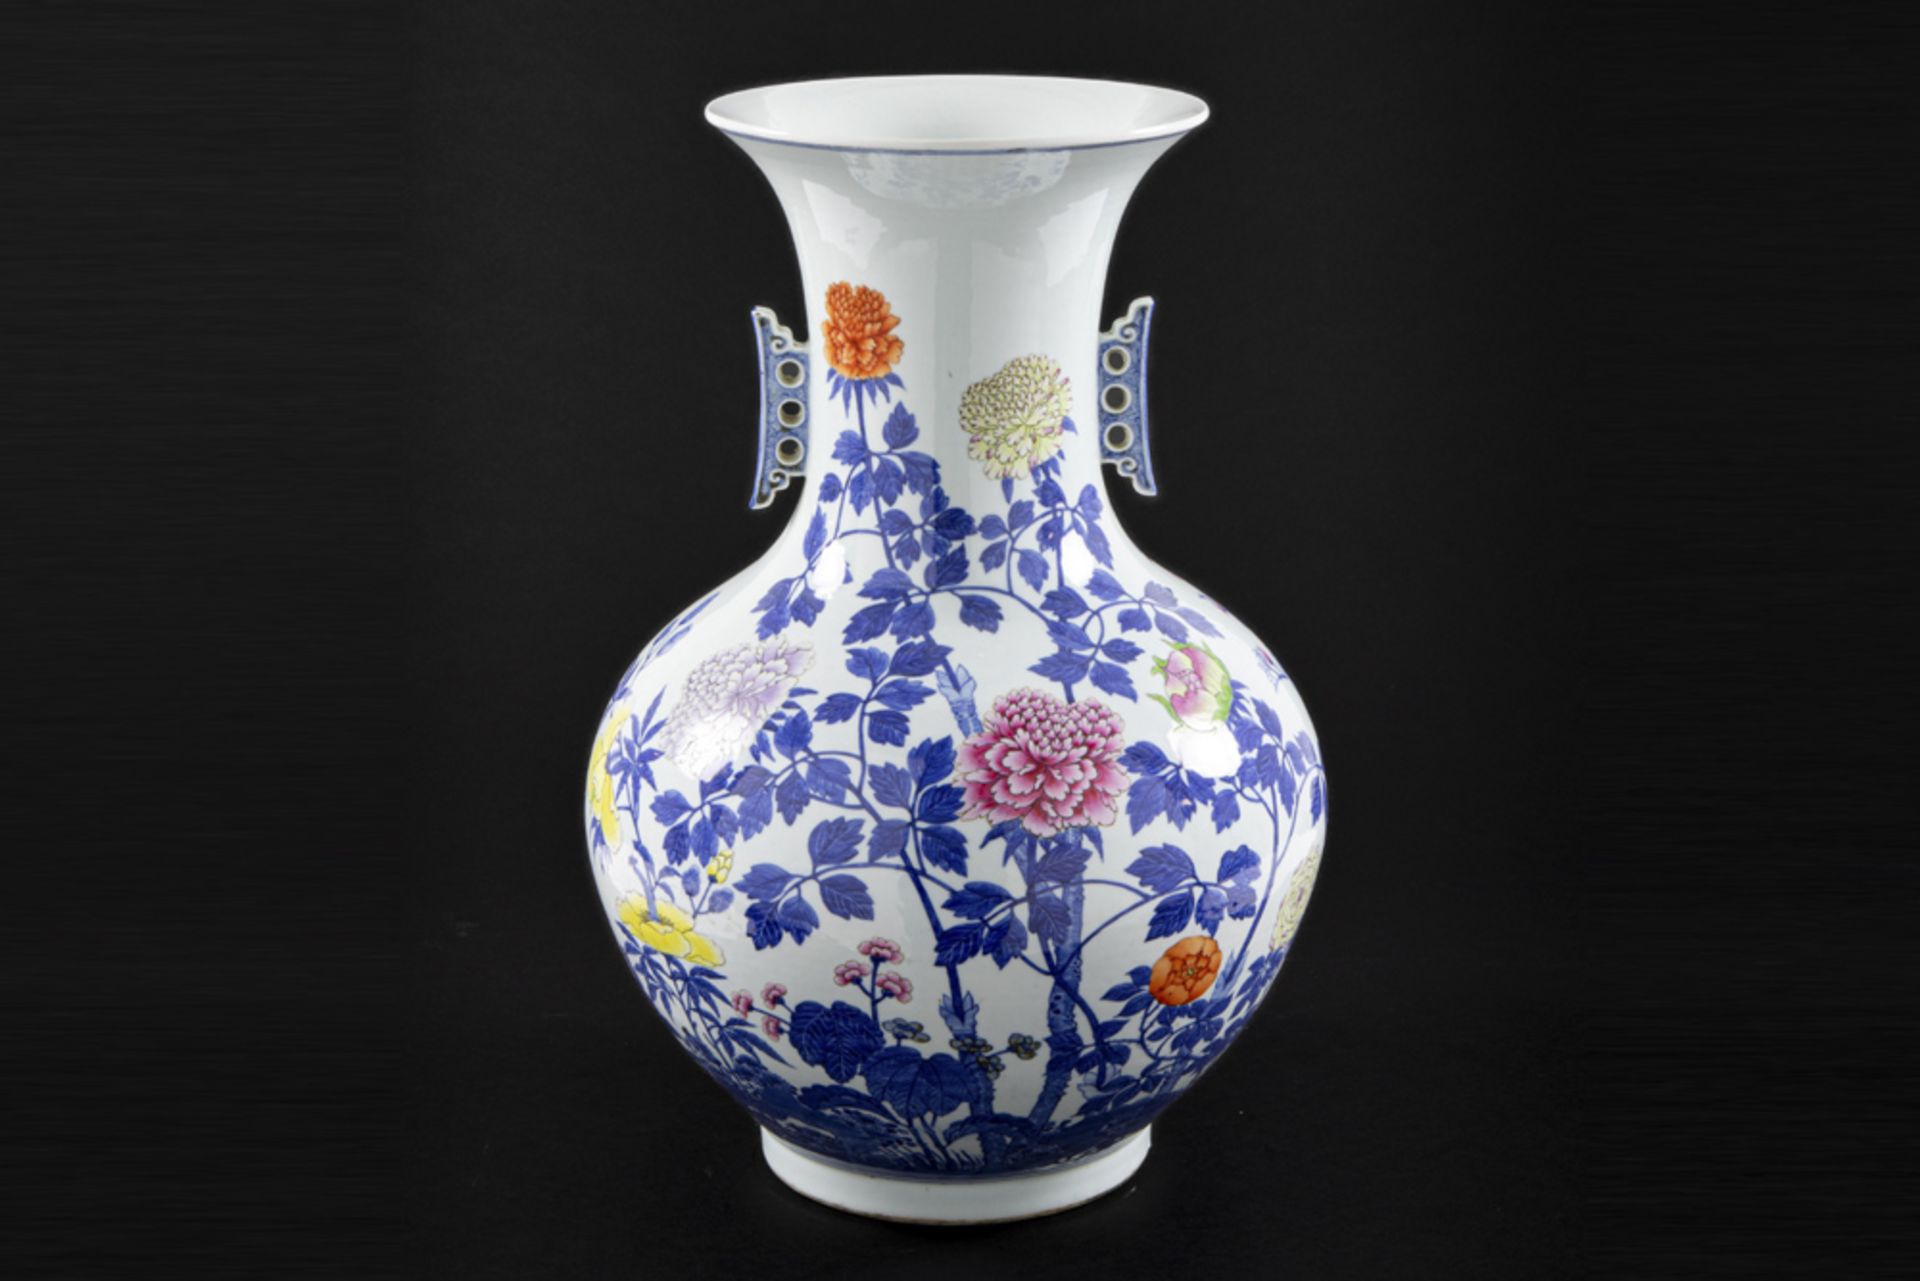 nice antique Chinese vase in marked porcelain with a blue-white and polychrome, floral decor ||